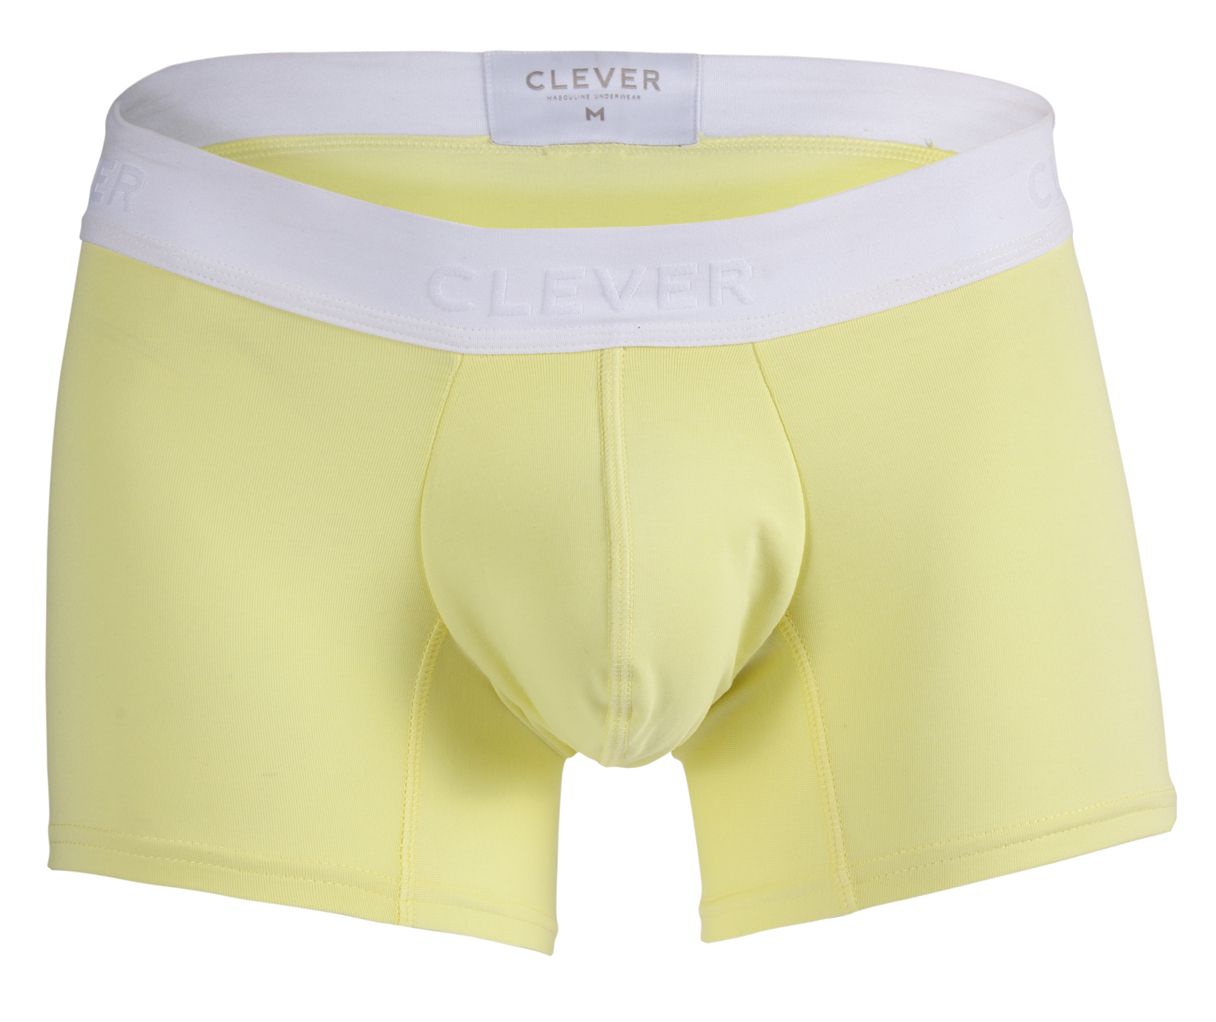 Clever 1508 Tethis Trunks